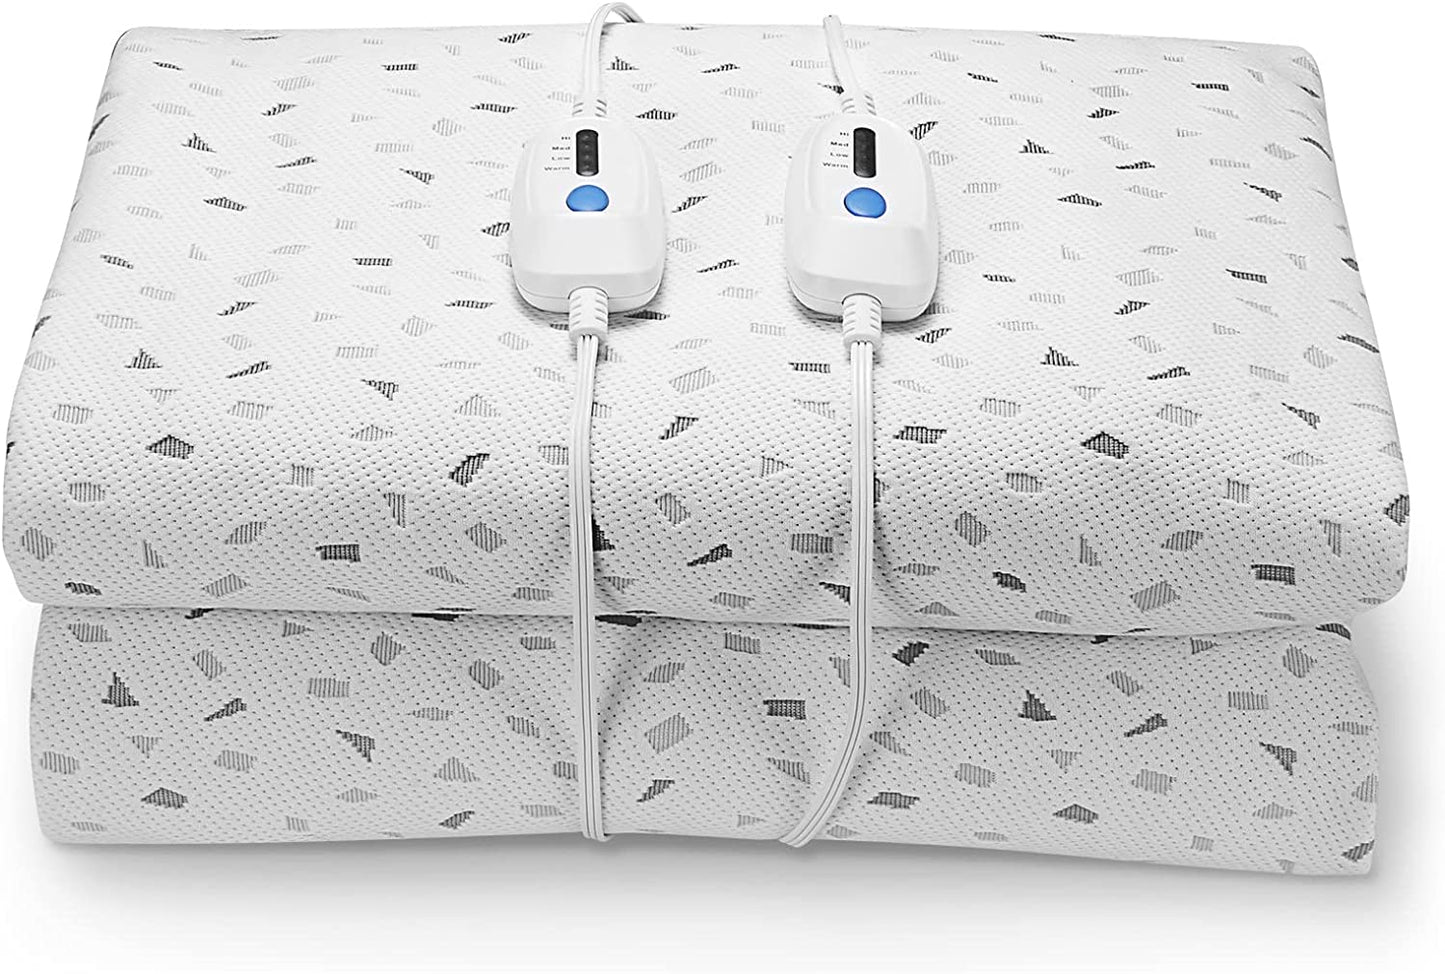 Heated Mattress Pad Queen Size 60"X80", Electric Underblanket Mattress Cover Bed Warmer Fit up to 15" Deep Pocket, Dual Control with 4 Heat Settings, Auto off & Fast Heating & Machine Washable